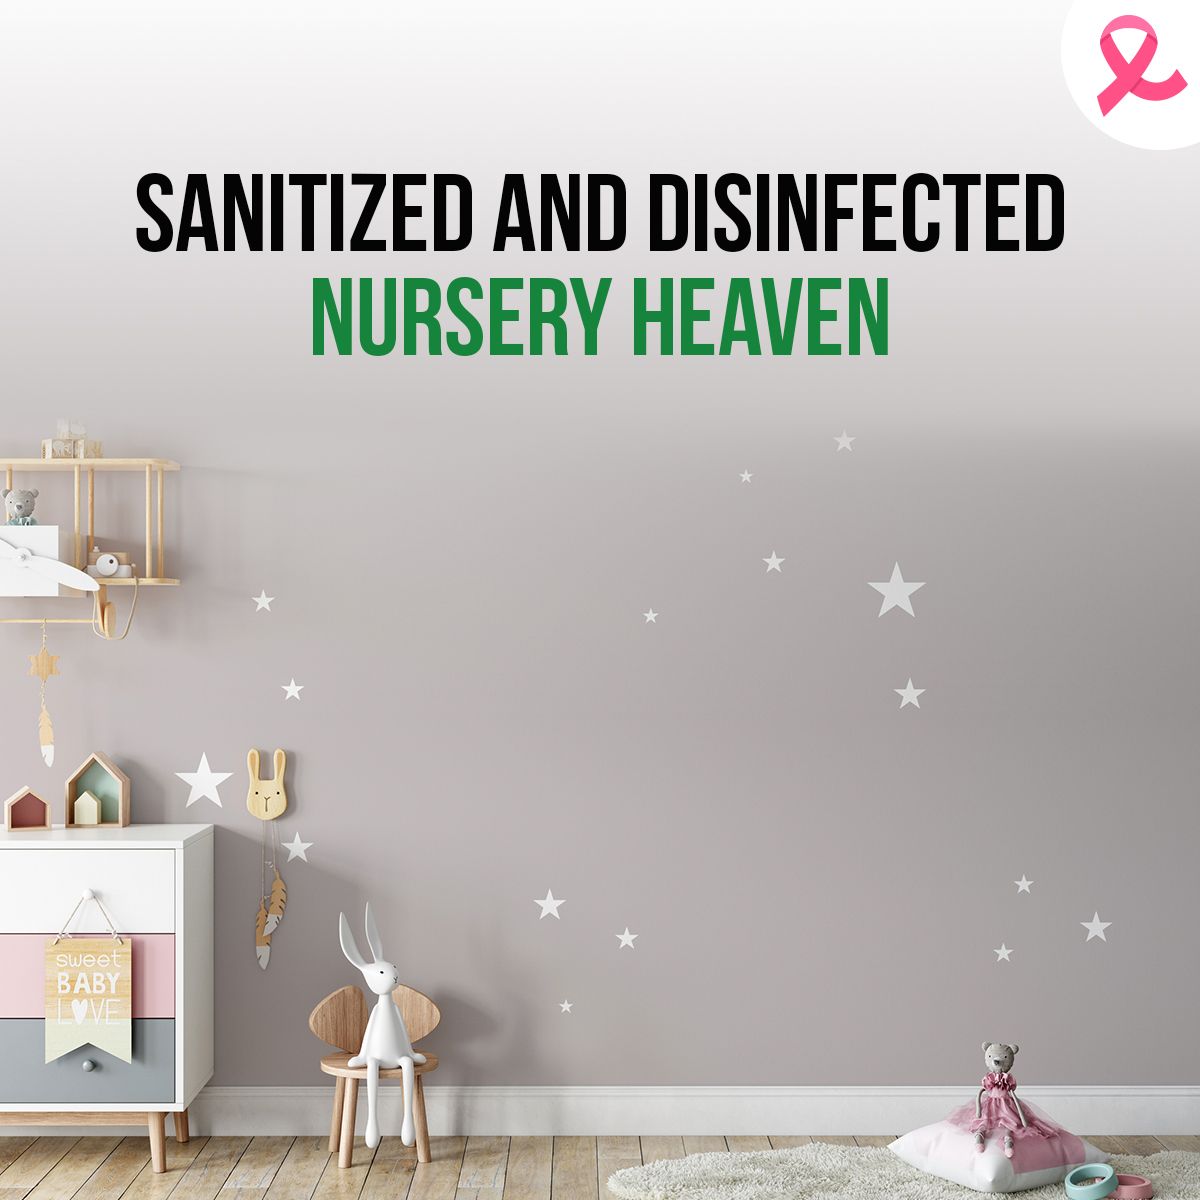 Sanitized and Disinfected Nursery Heaven